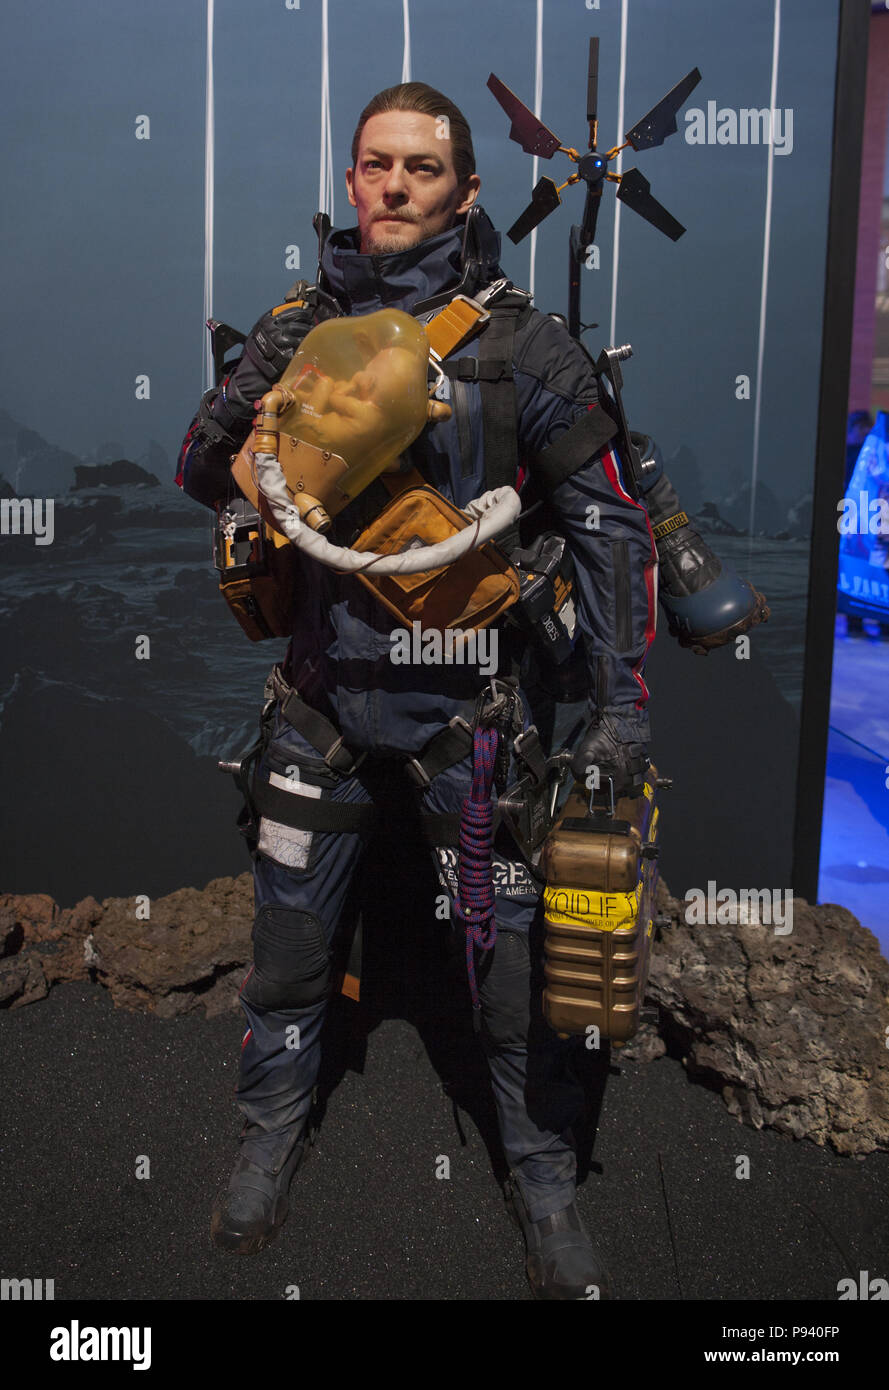 Sony PlayStation's booth at E3 this year featured a lifelike full-sized  statue of Norman Reedus in full costume to promote Hideo Kojima's highly  anticipated new game 'Death Stranding'. Two recent cast announcements